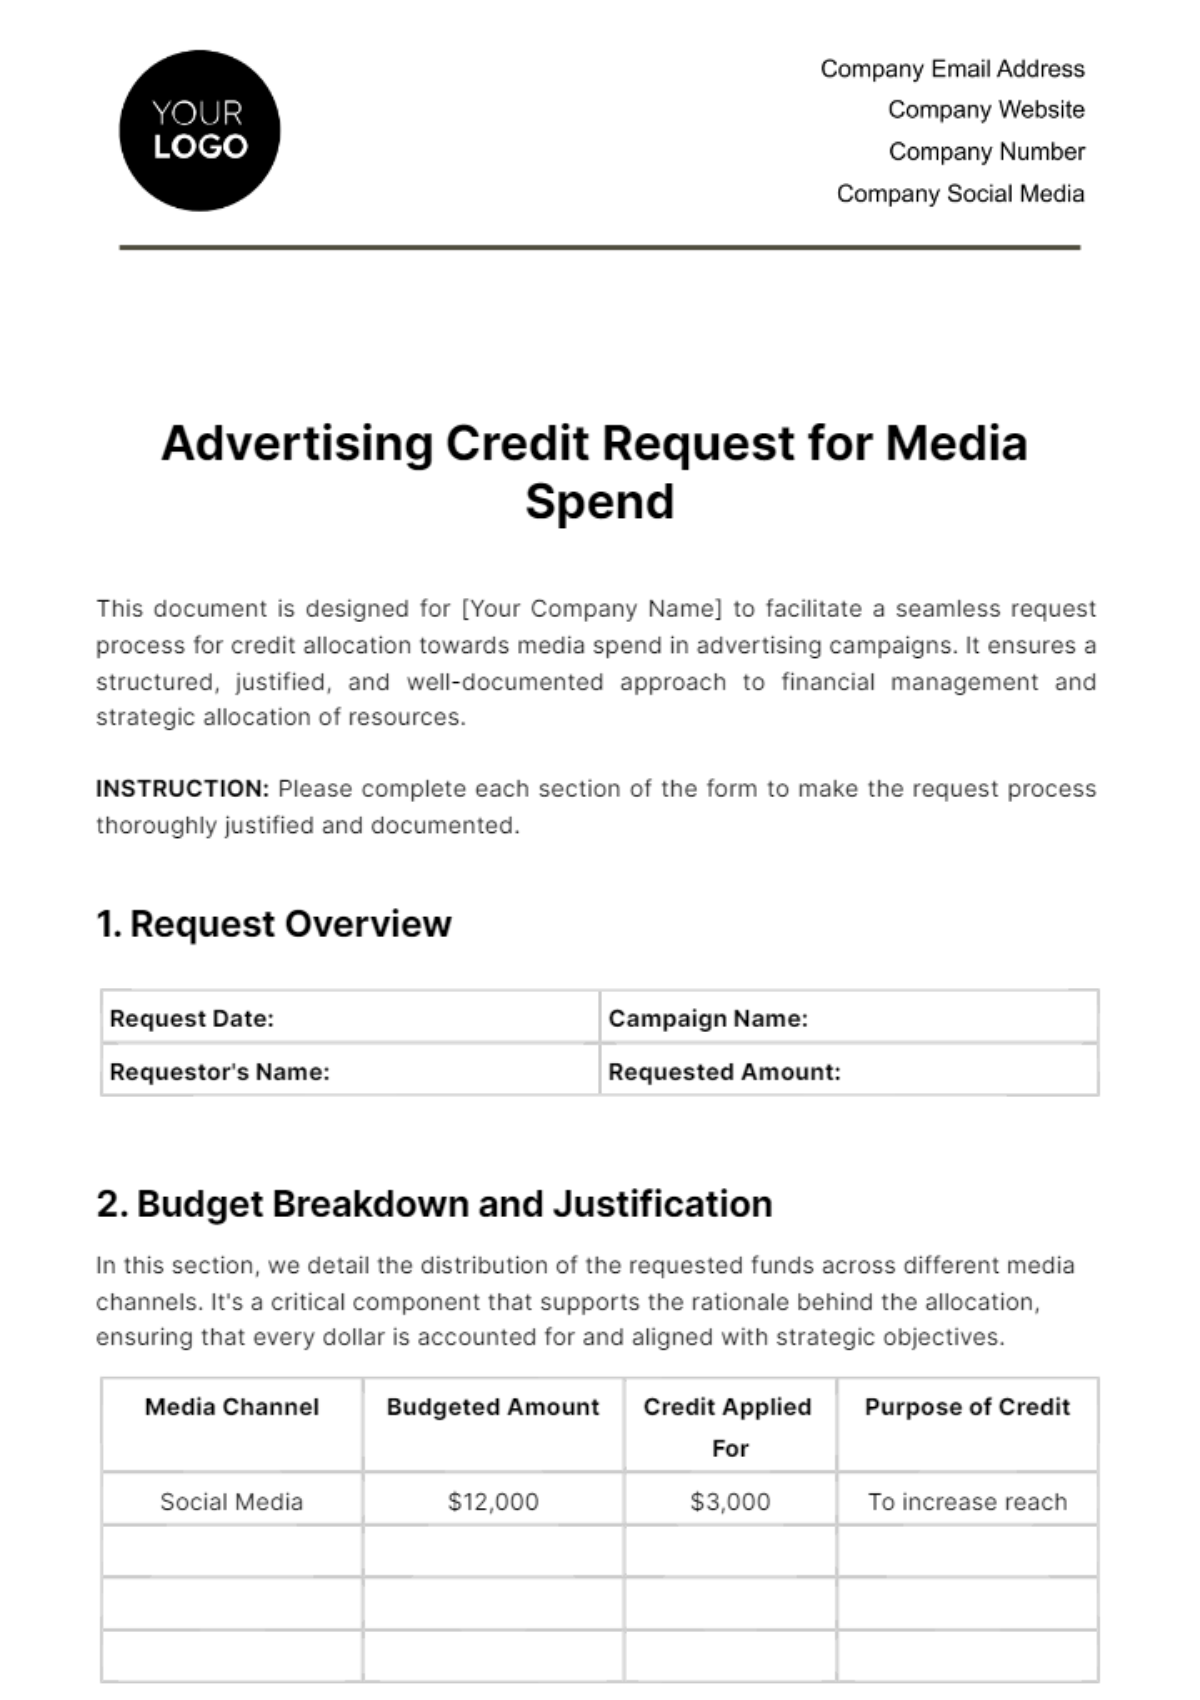 Advertising Credit Request for Media Spend Template